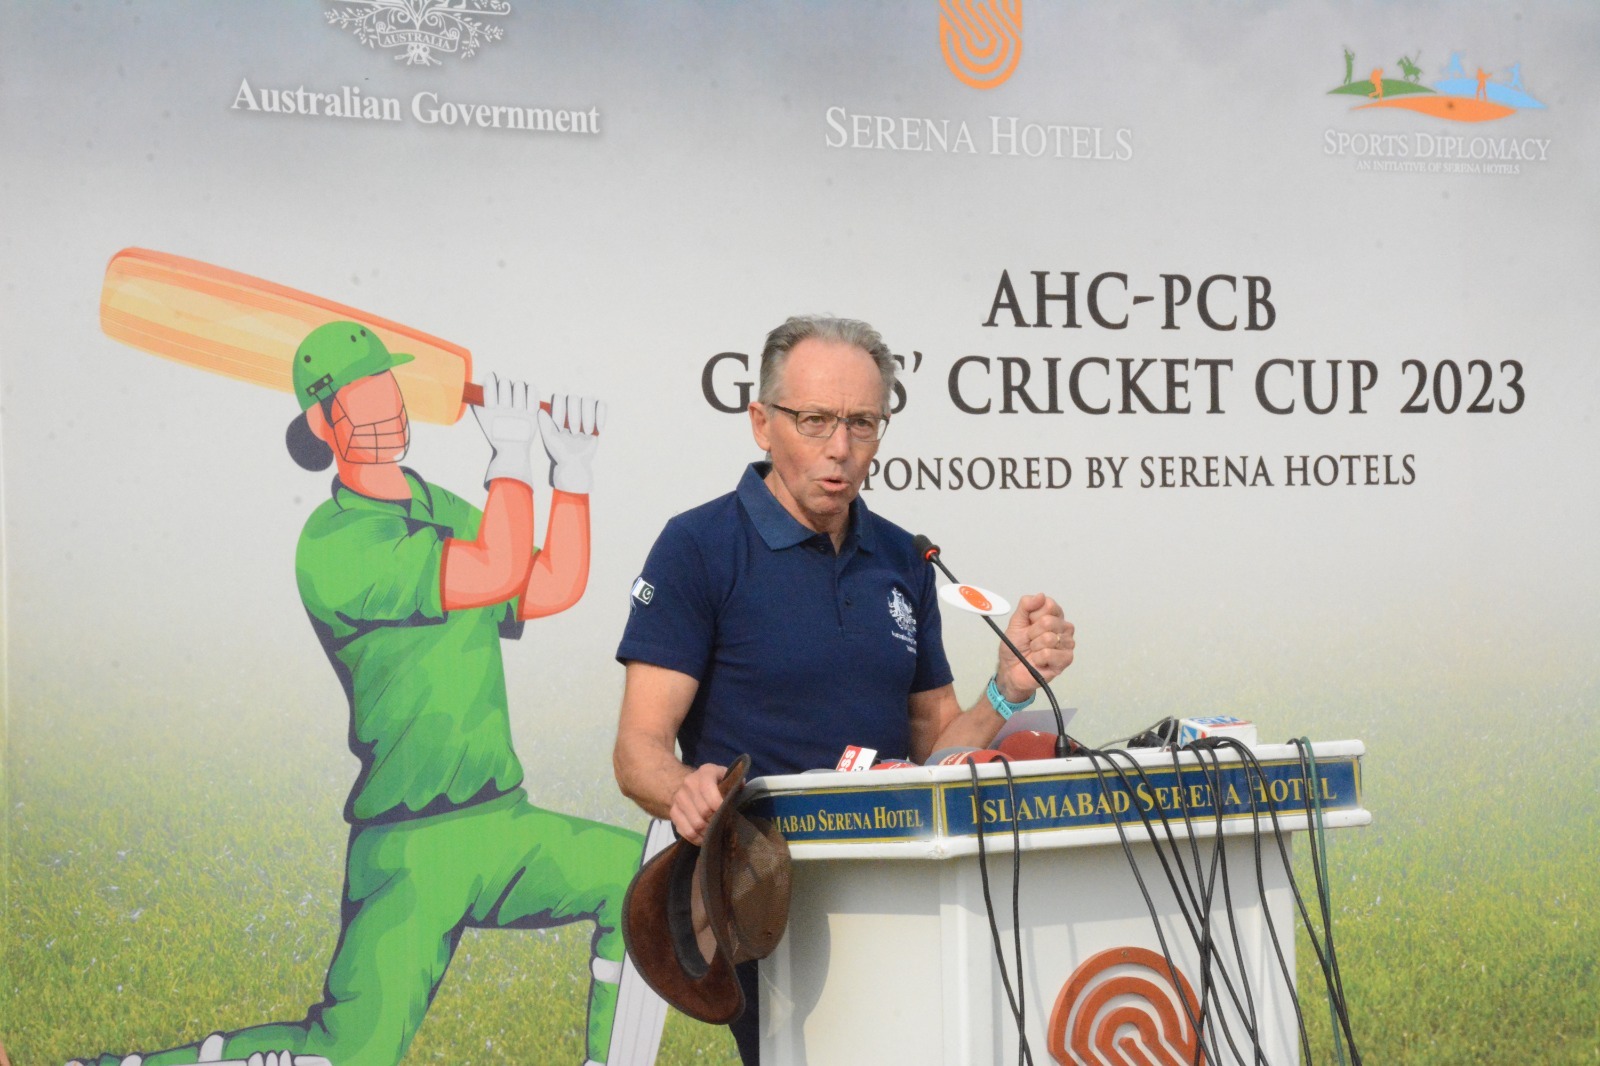 AHC-PCB host Girls' Cricket Cup